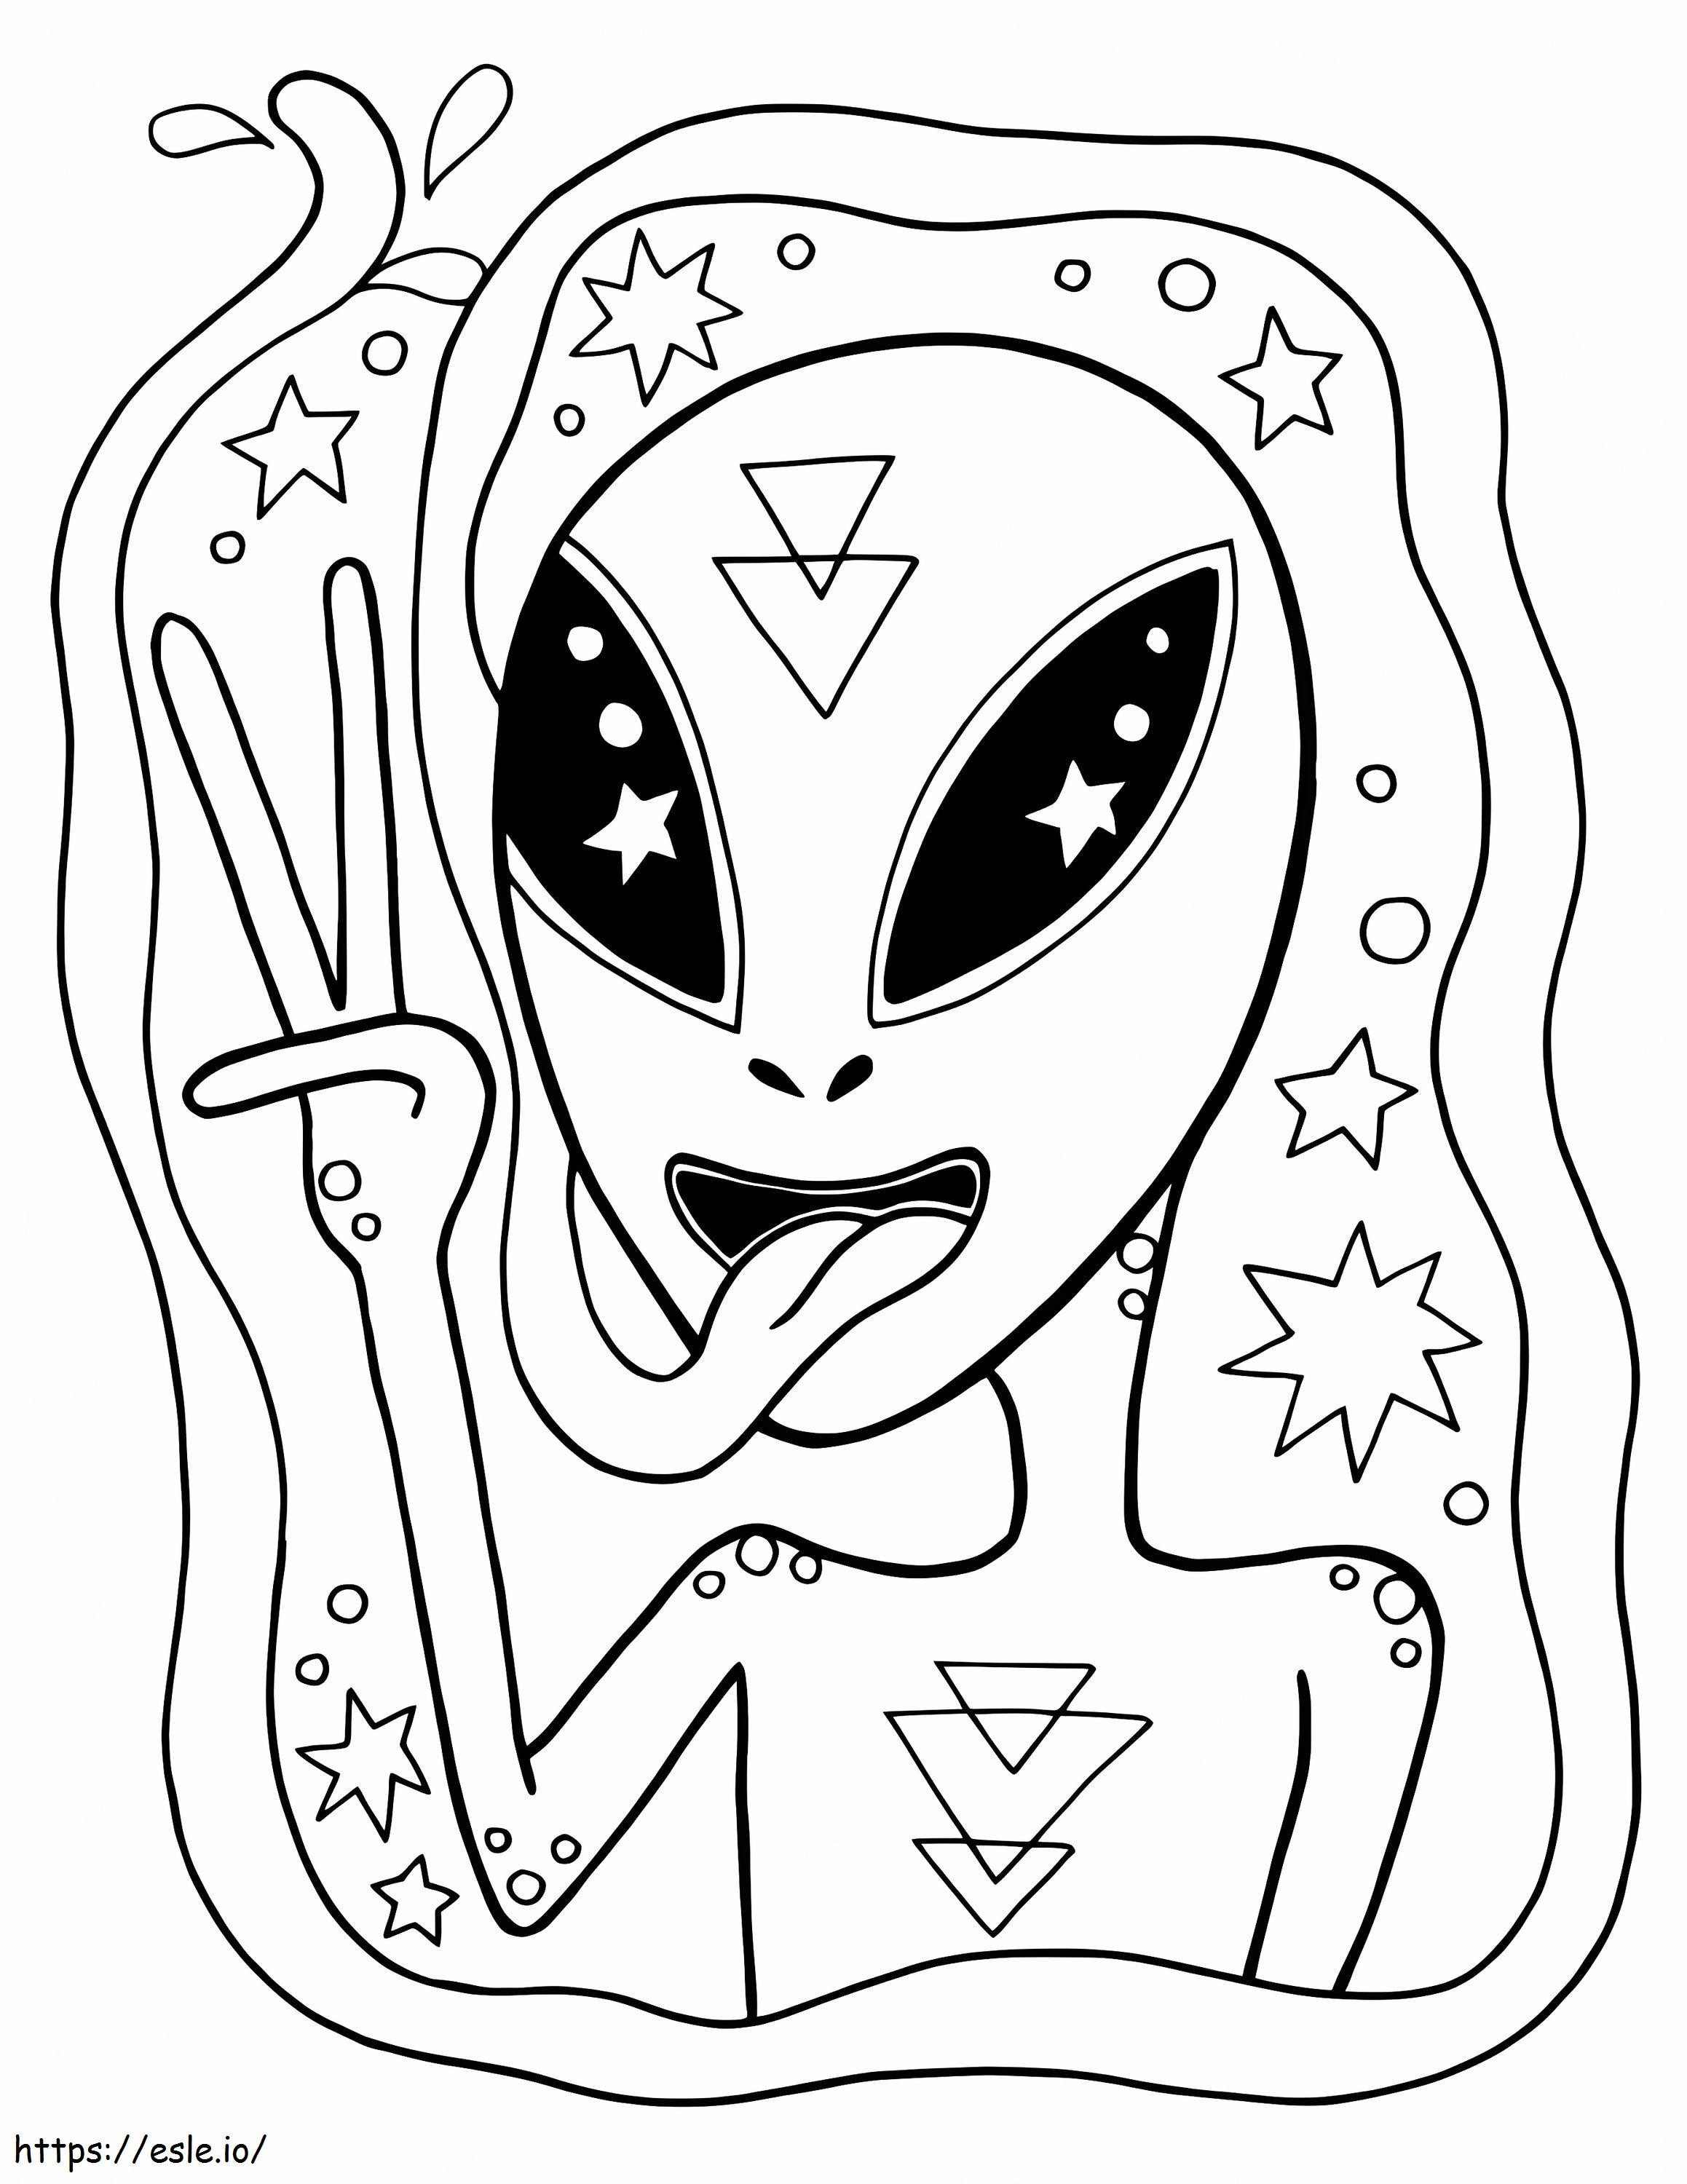 Aesthetic Alien coloring page